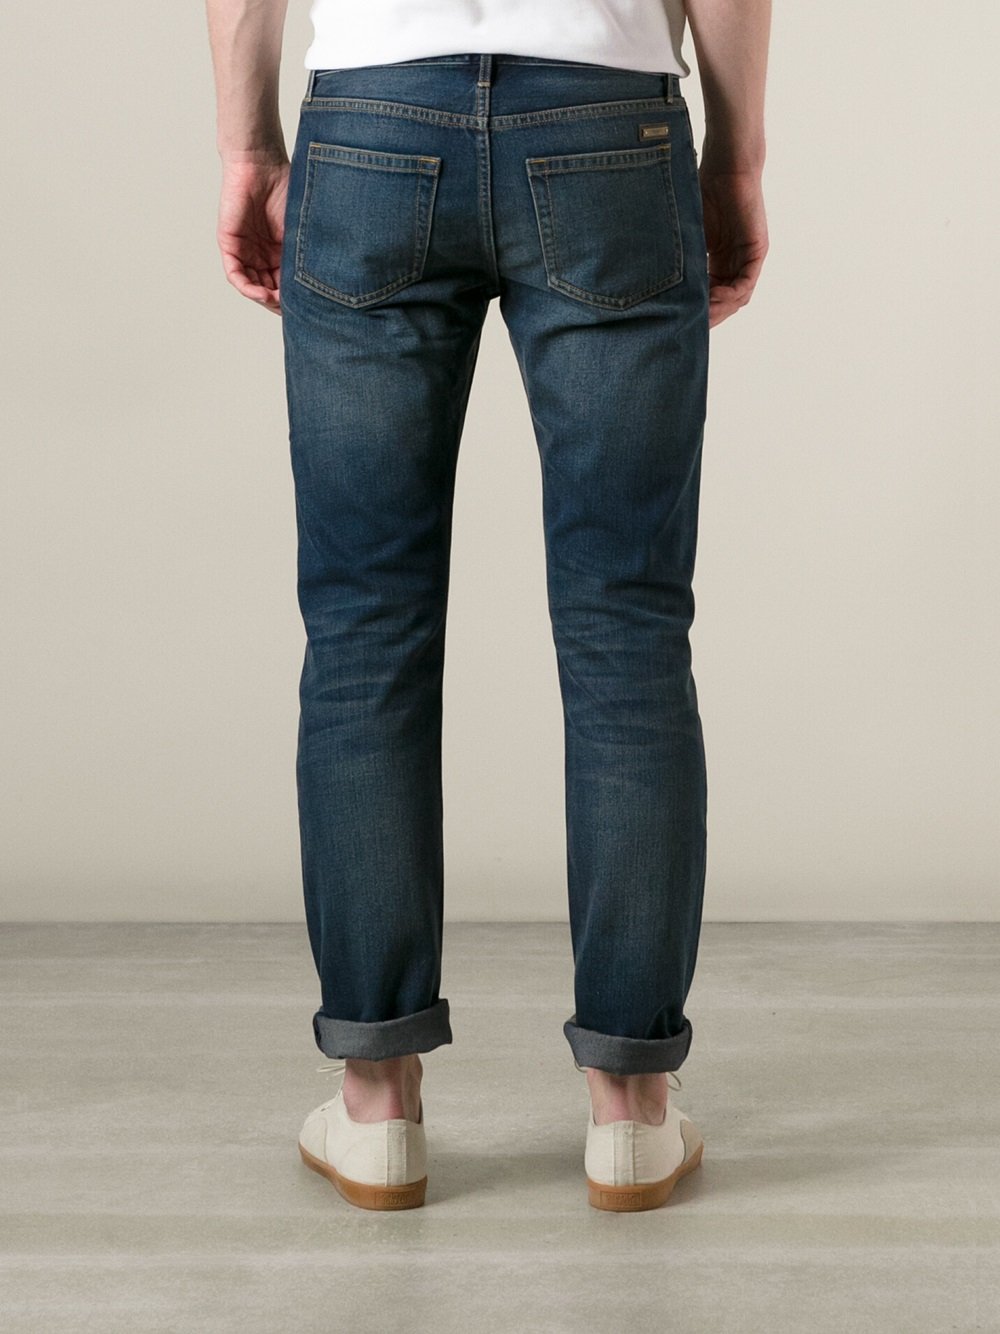 Burberry Brit Classic Jeans in Blue for Men - Lyst